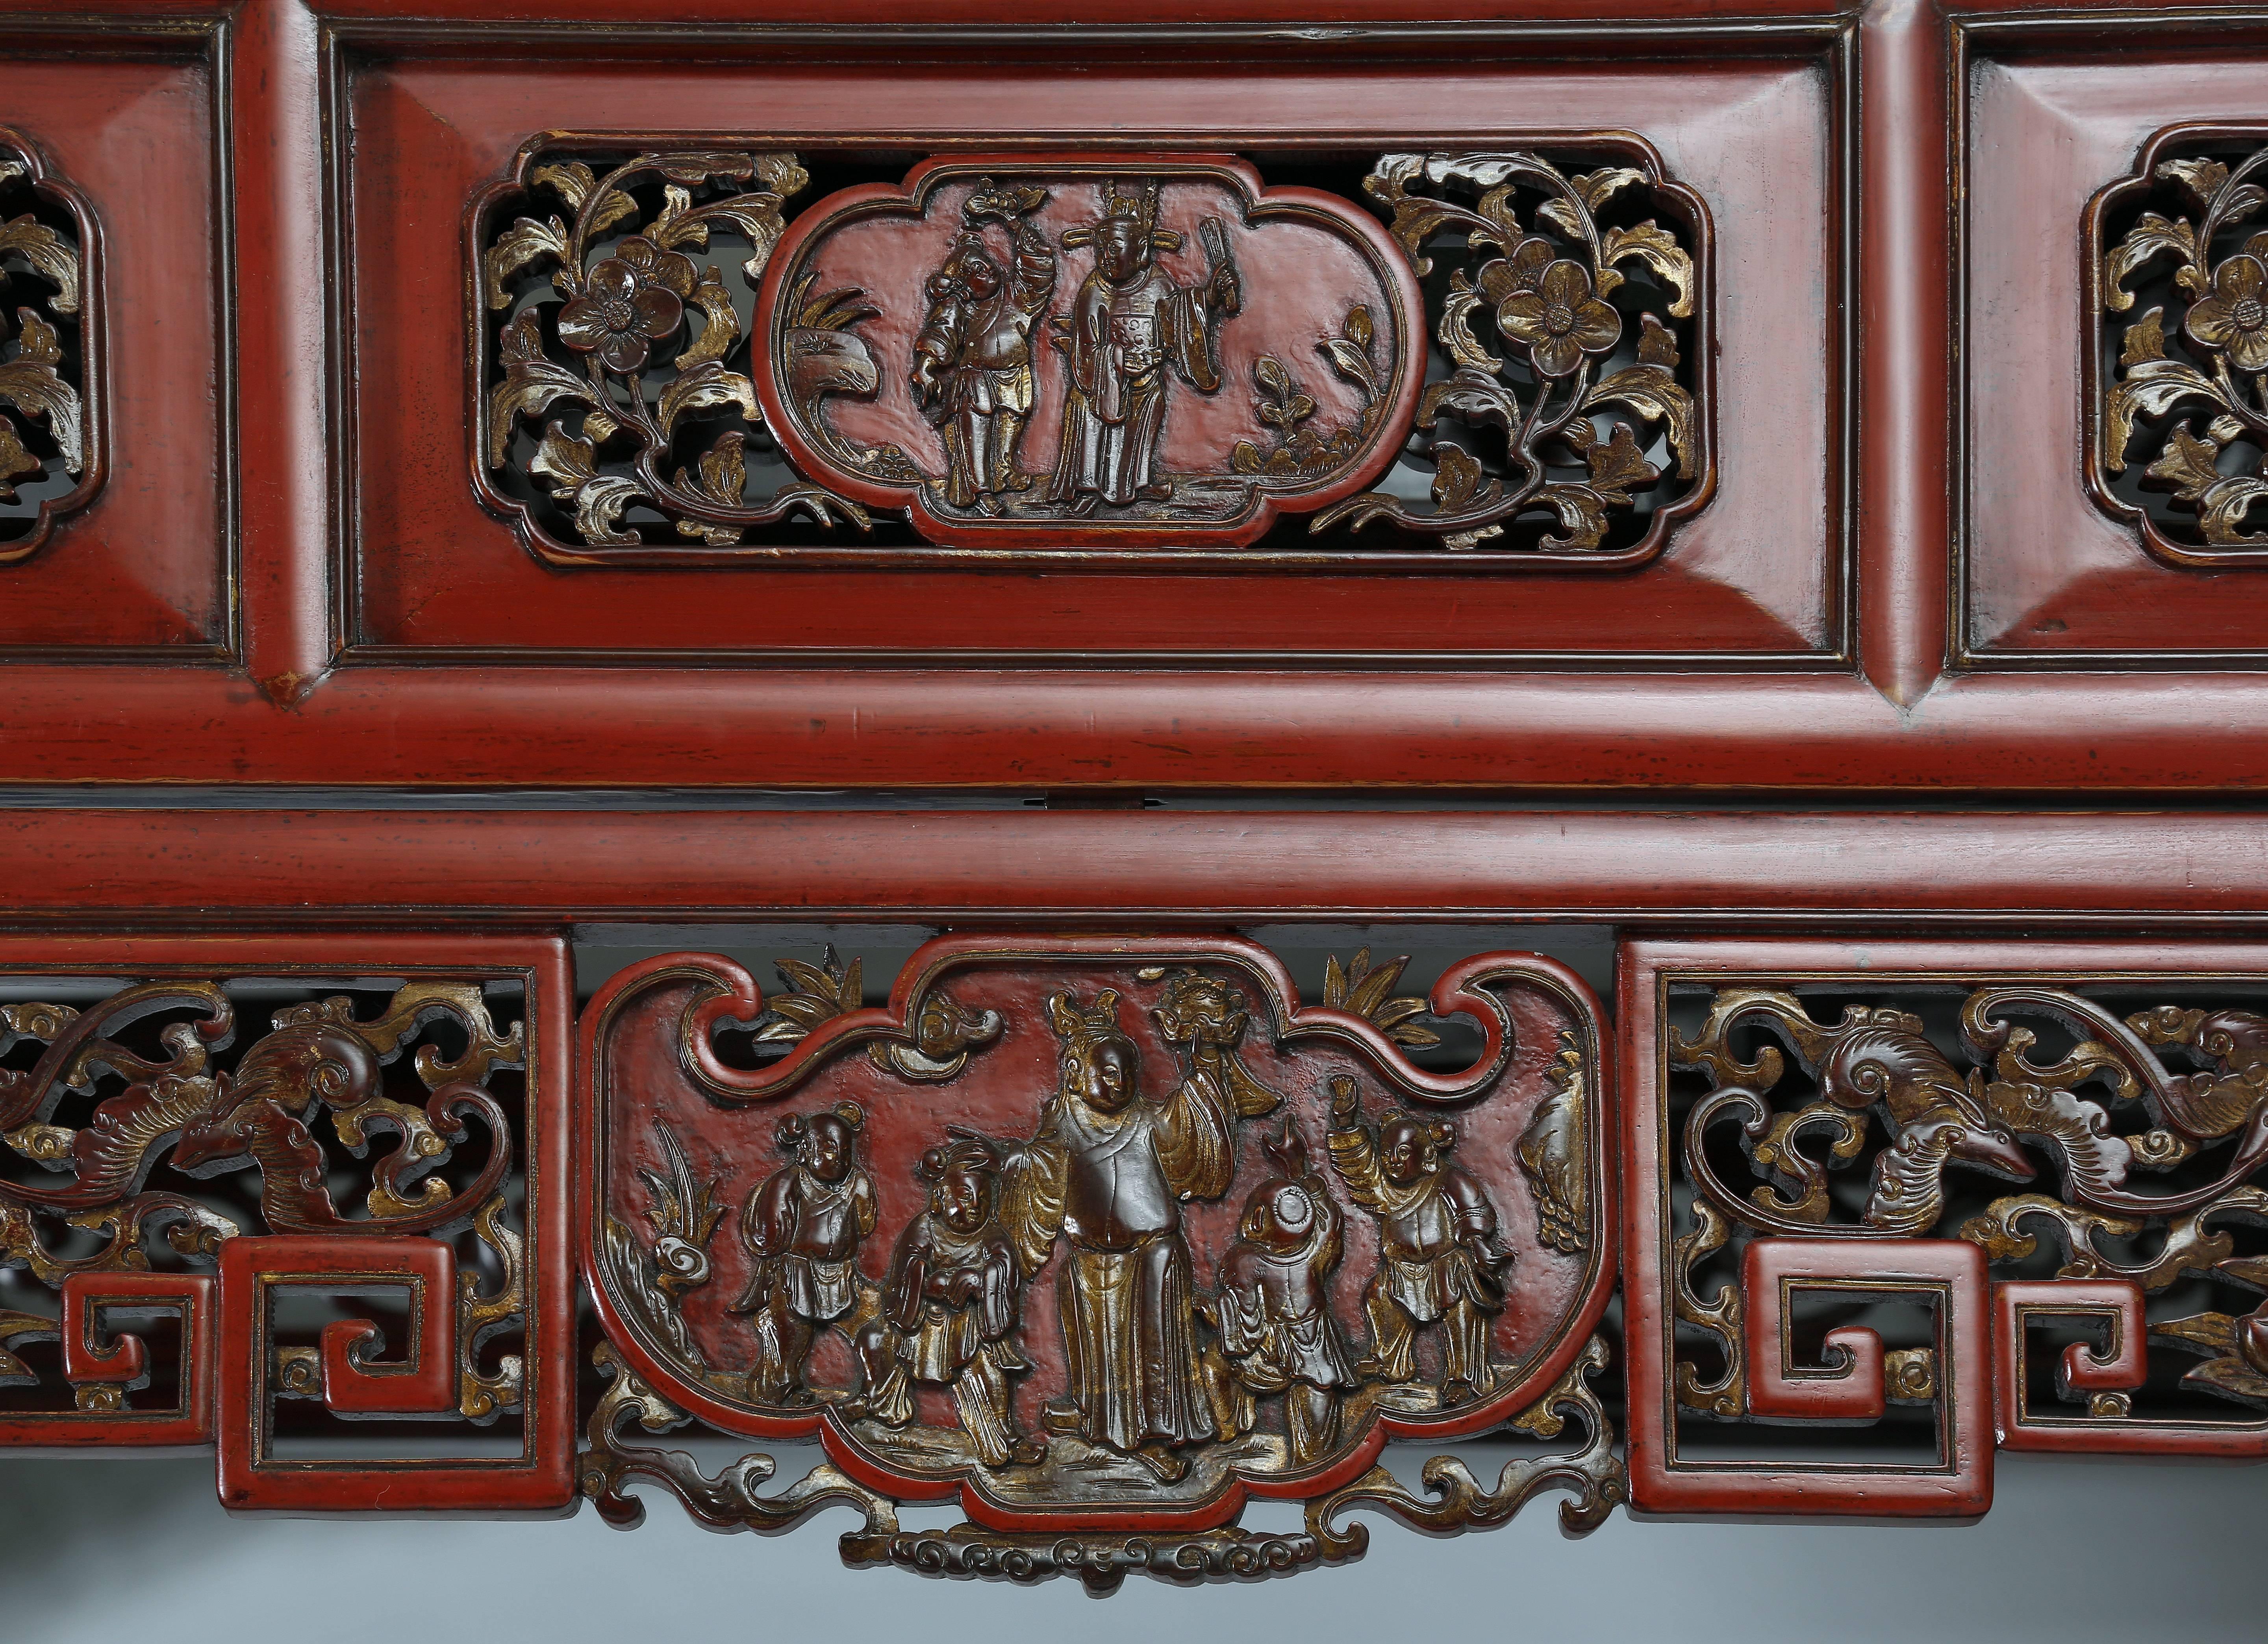 Hand-Painted Antique Red Lacquer Gilt Six-Posted Carved Canopy Wedding Bed, Chinoiserie